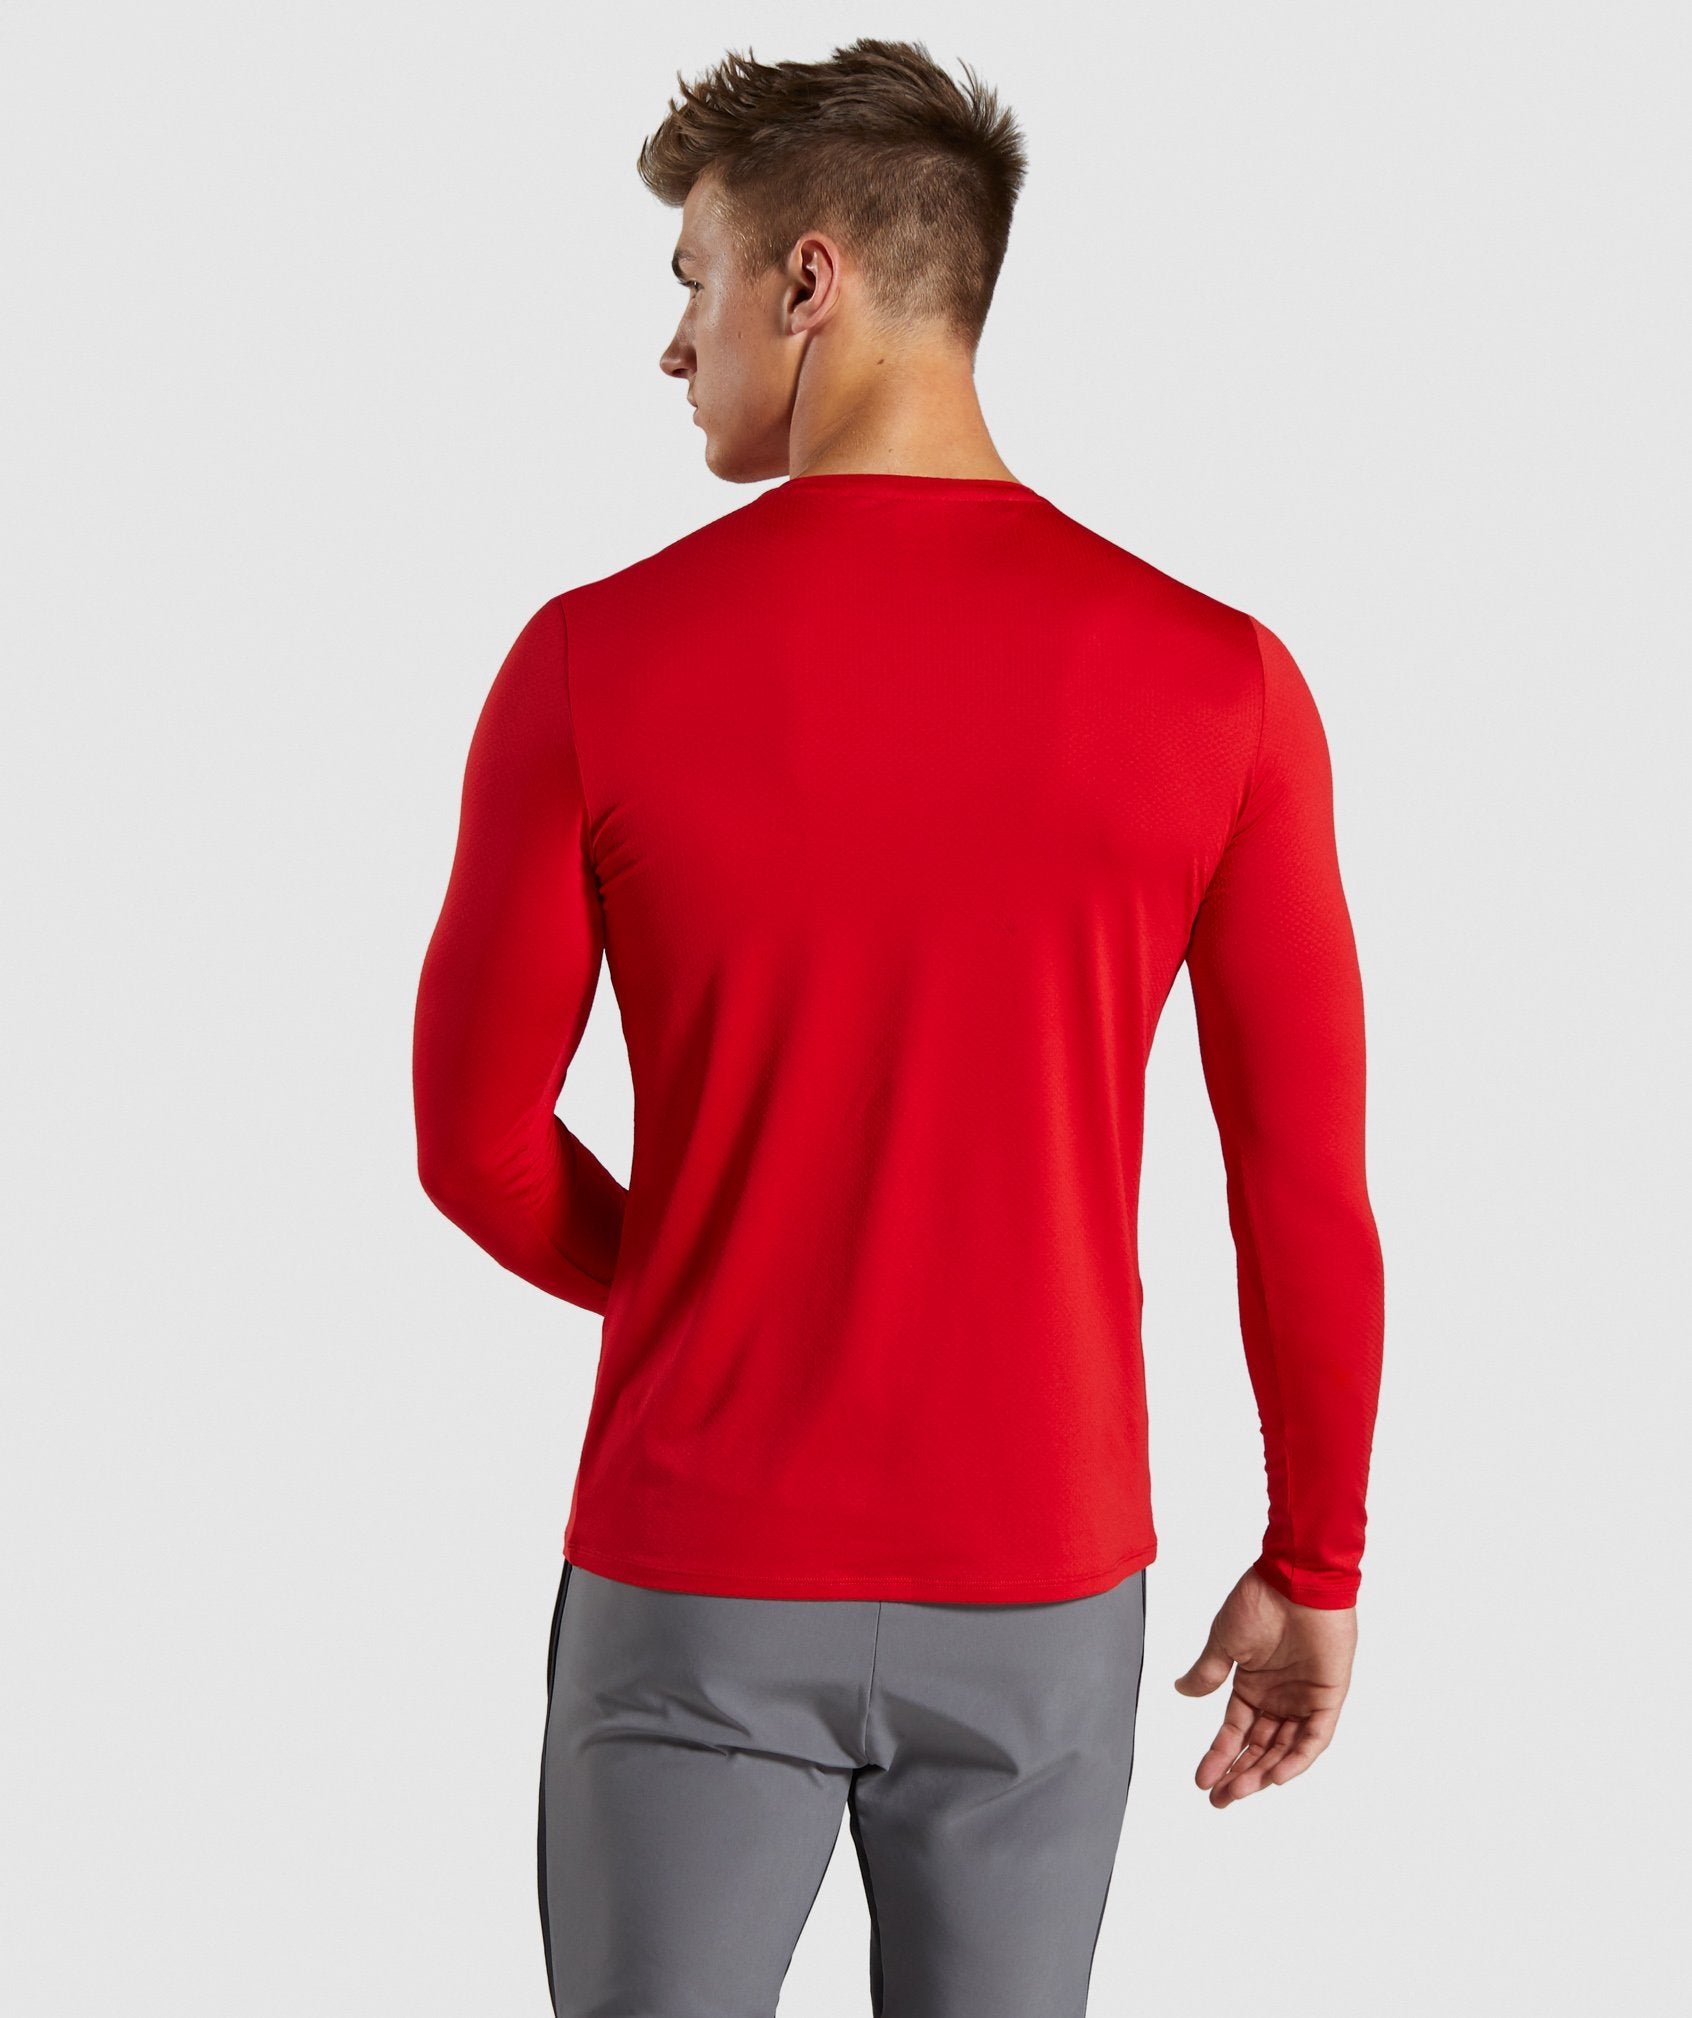 Speed Long Sleeve T-Shirt in Red - view 2